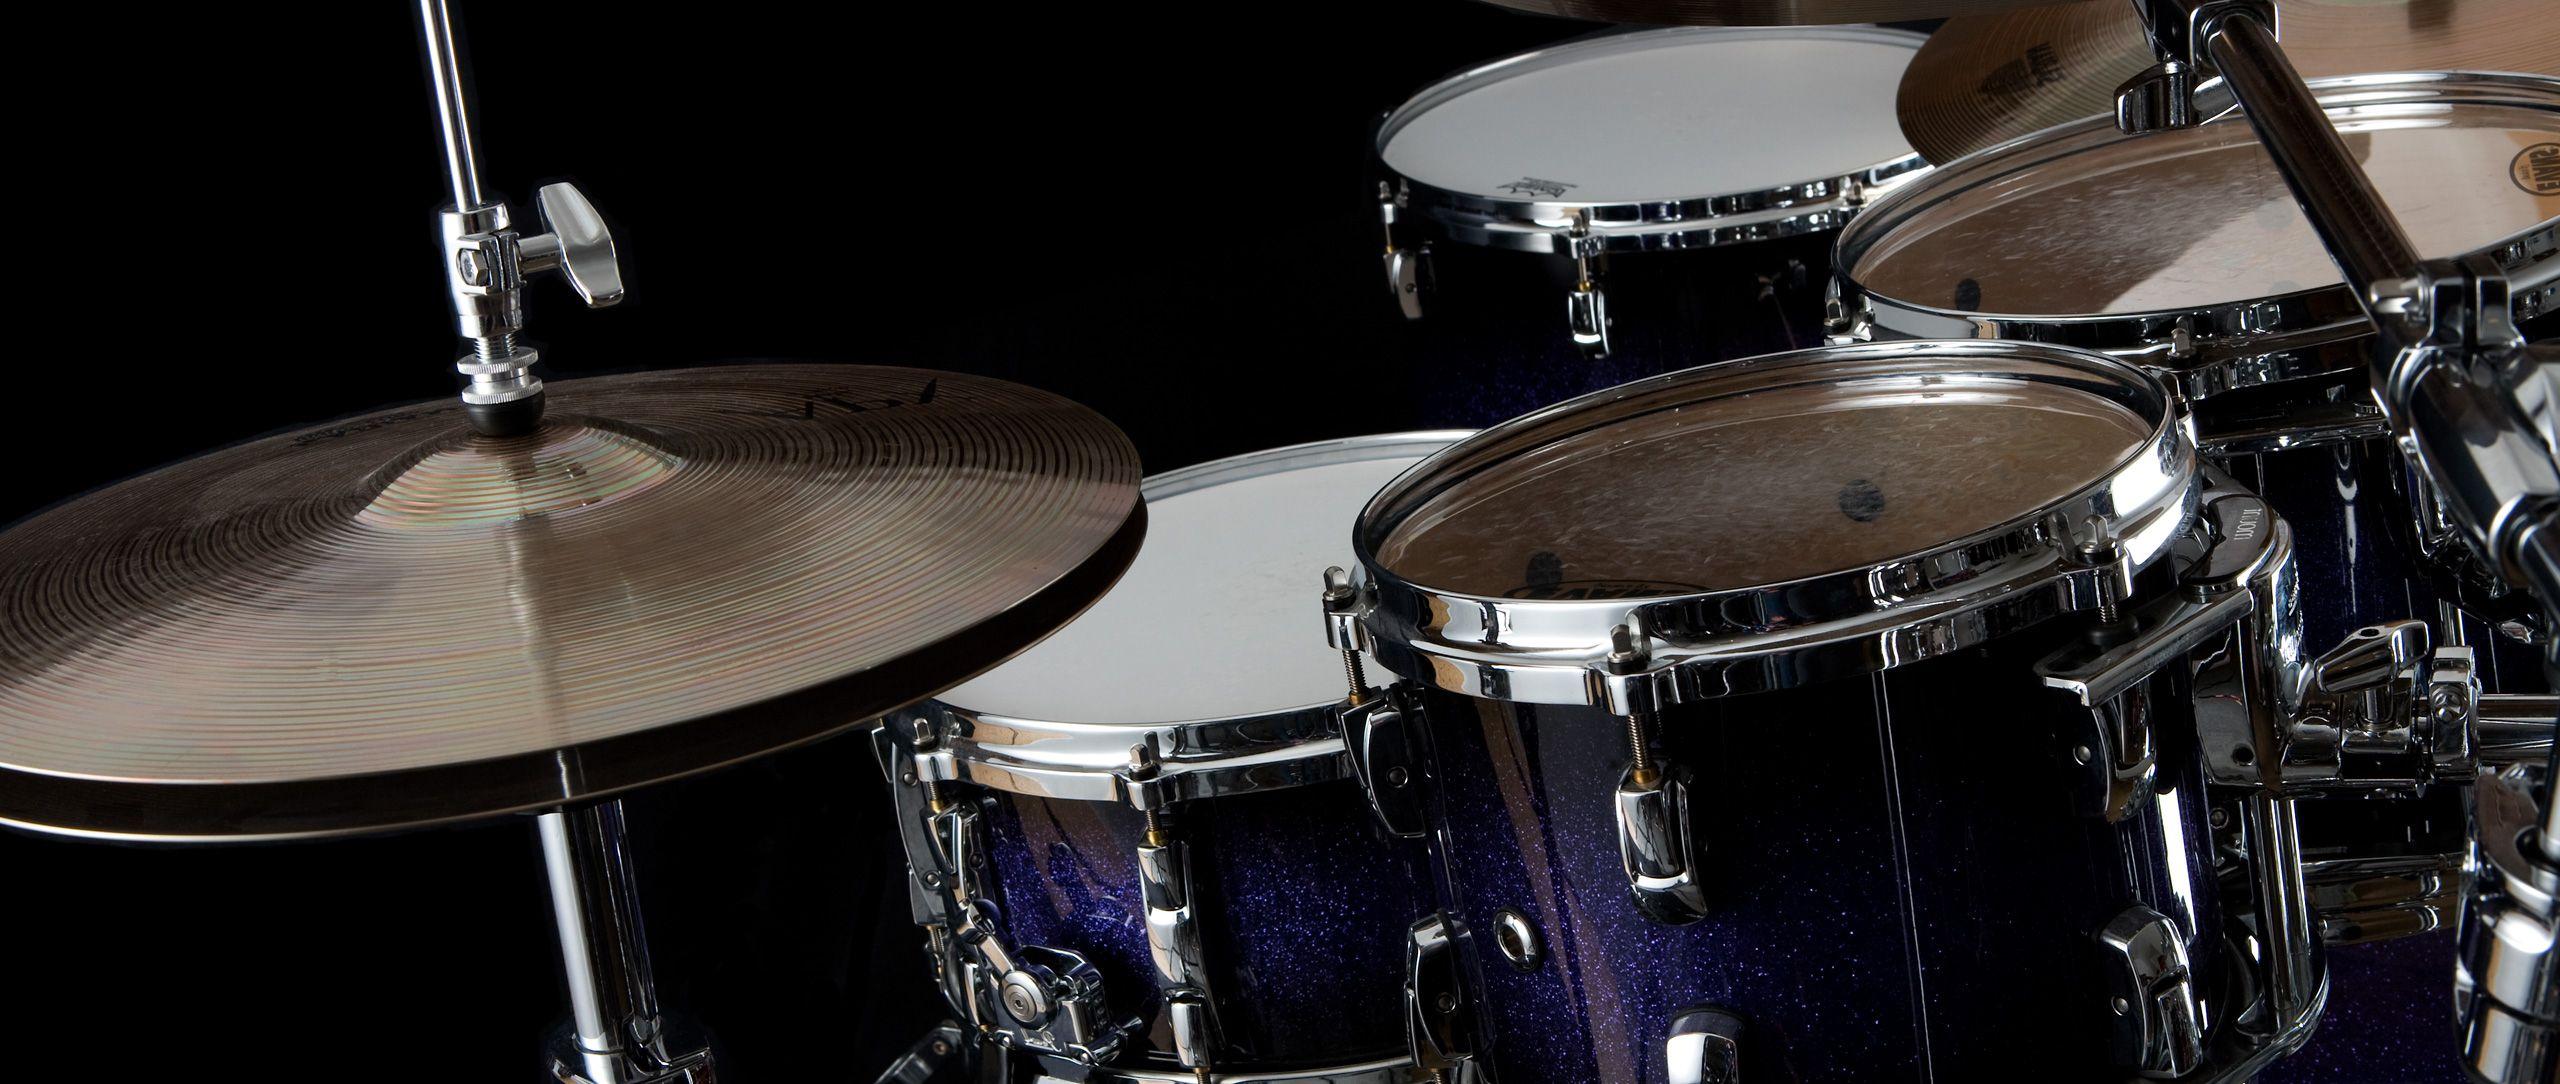 Drums Wallpaper, Most Beautiful Image. Drums HD Widescreen